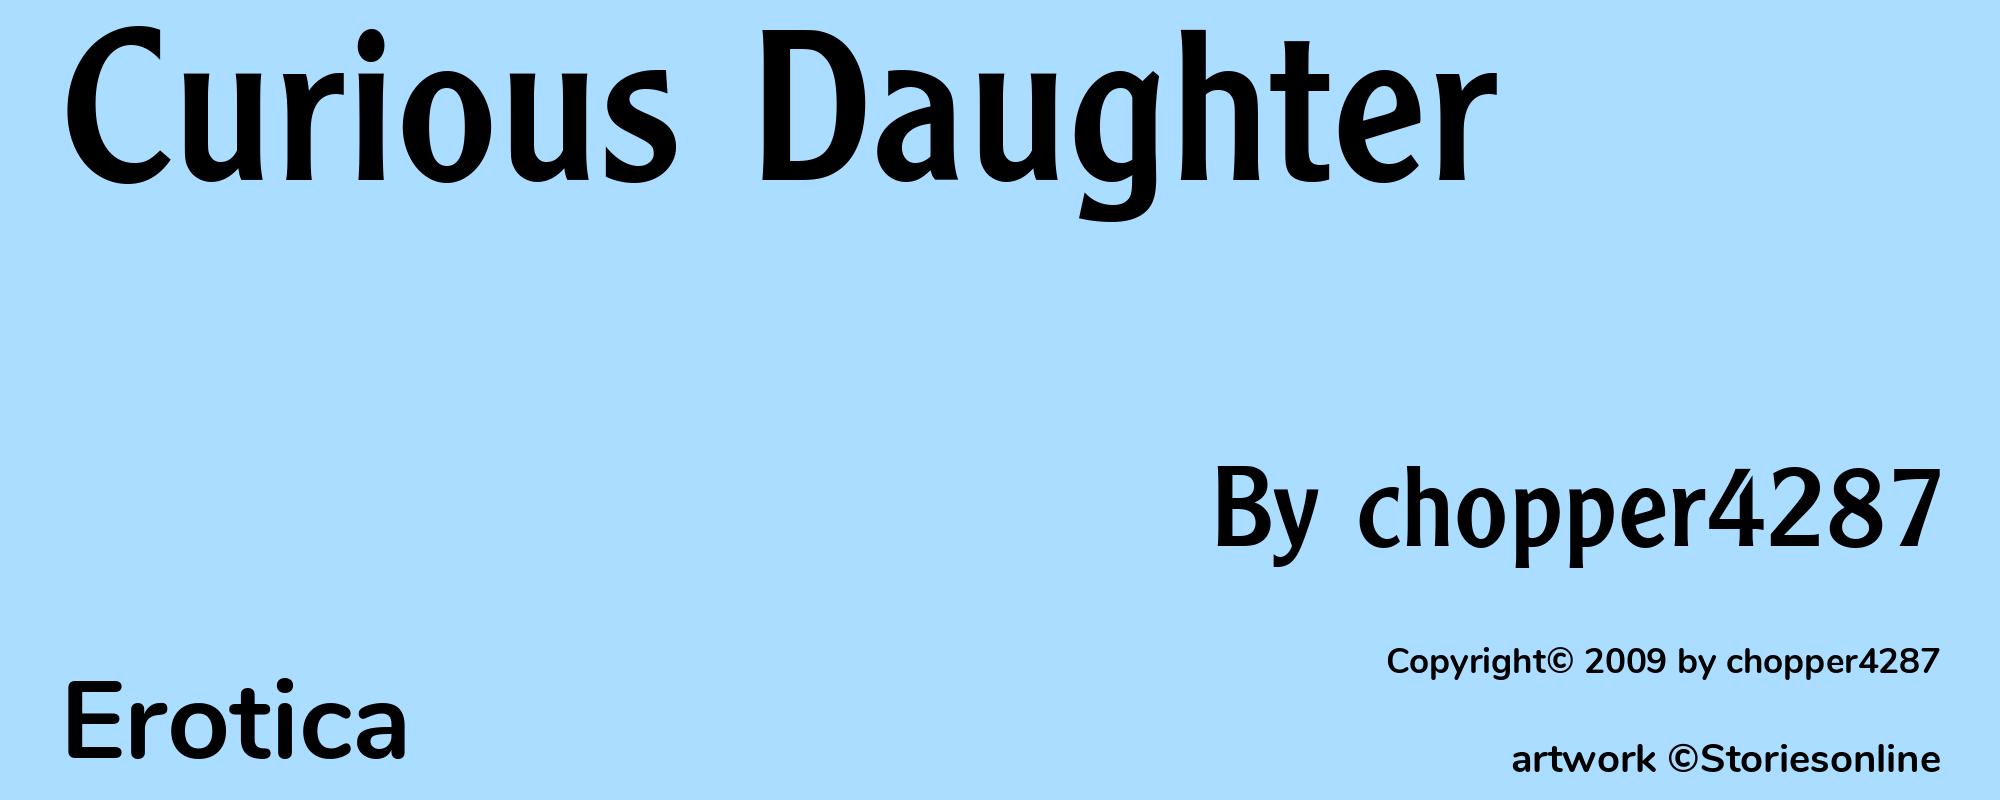 Curious Daughter - Cover